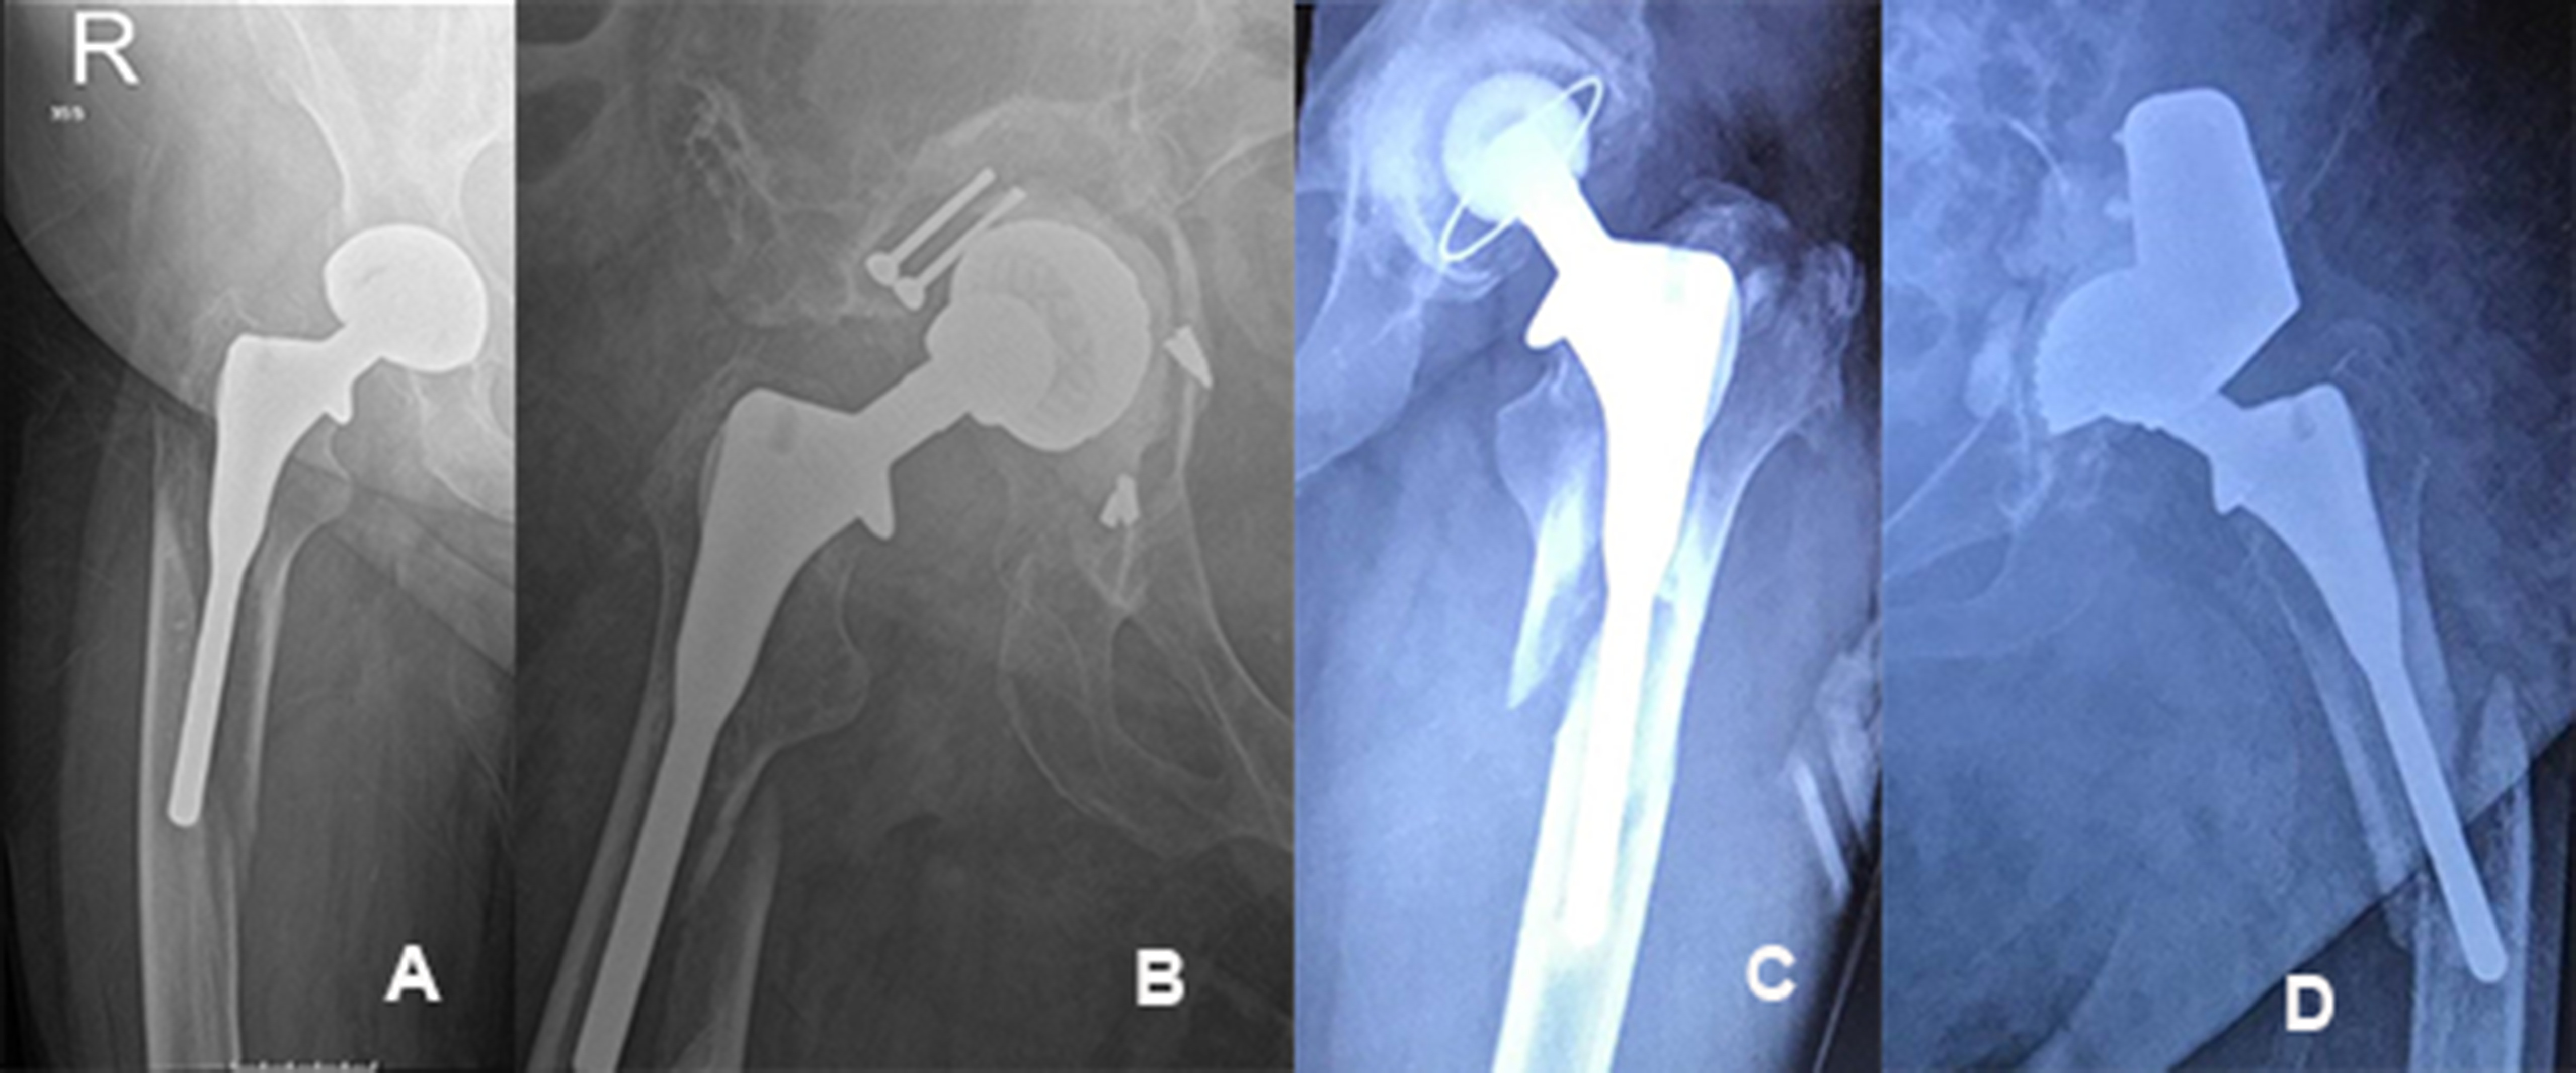 Fig. 3 
          Radiographs of patients with periprosthetic fractures. a) 60-year-old female, who was aged 51 years when the fracture occured. b) 76-year old female, who was aged 66 years when the fracture occured. c) 72-year old male, who was aged 67 years when the fracture occured. d) 67-year-old male, who was aged 62 years when the fracture occured.
        